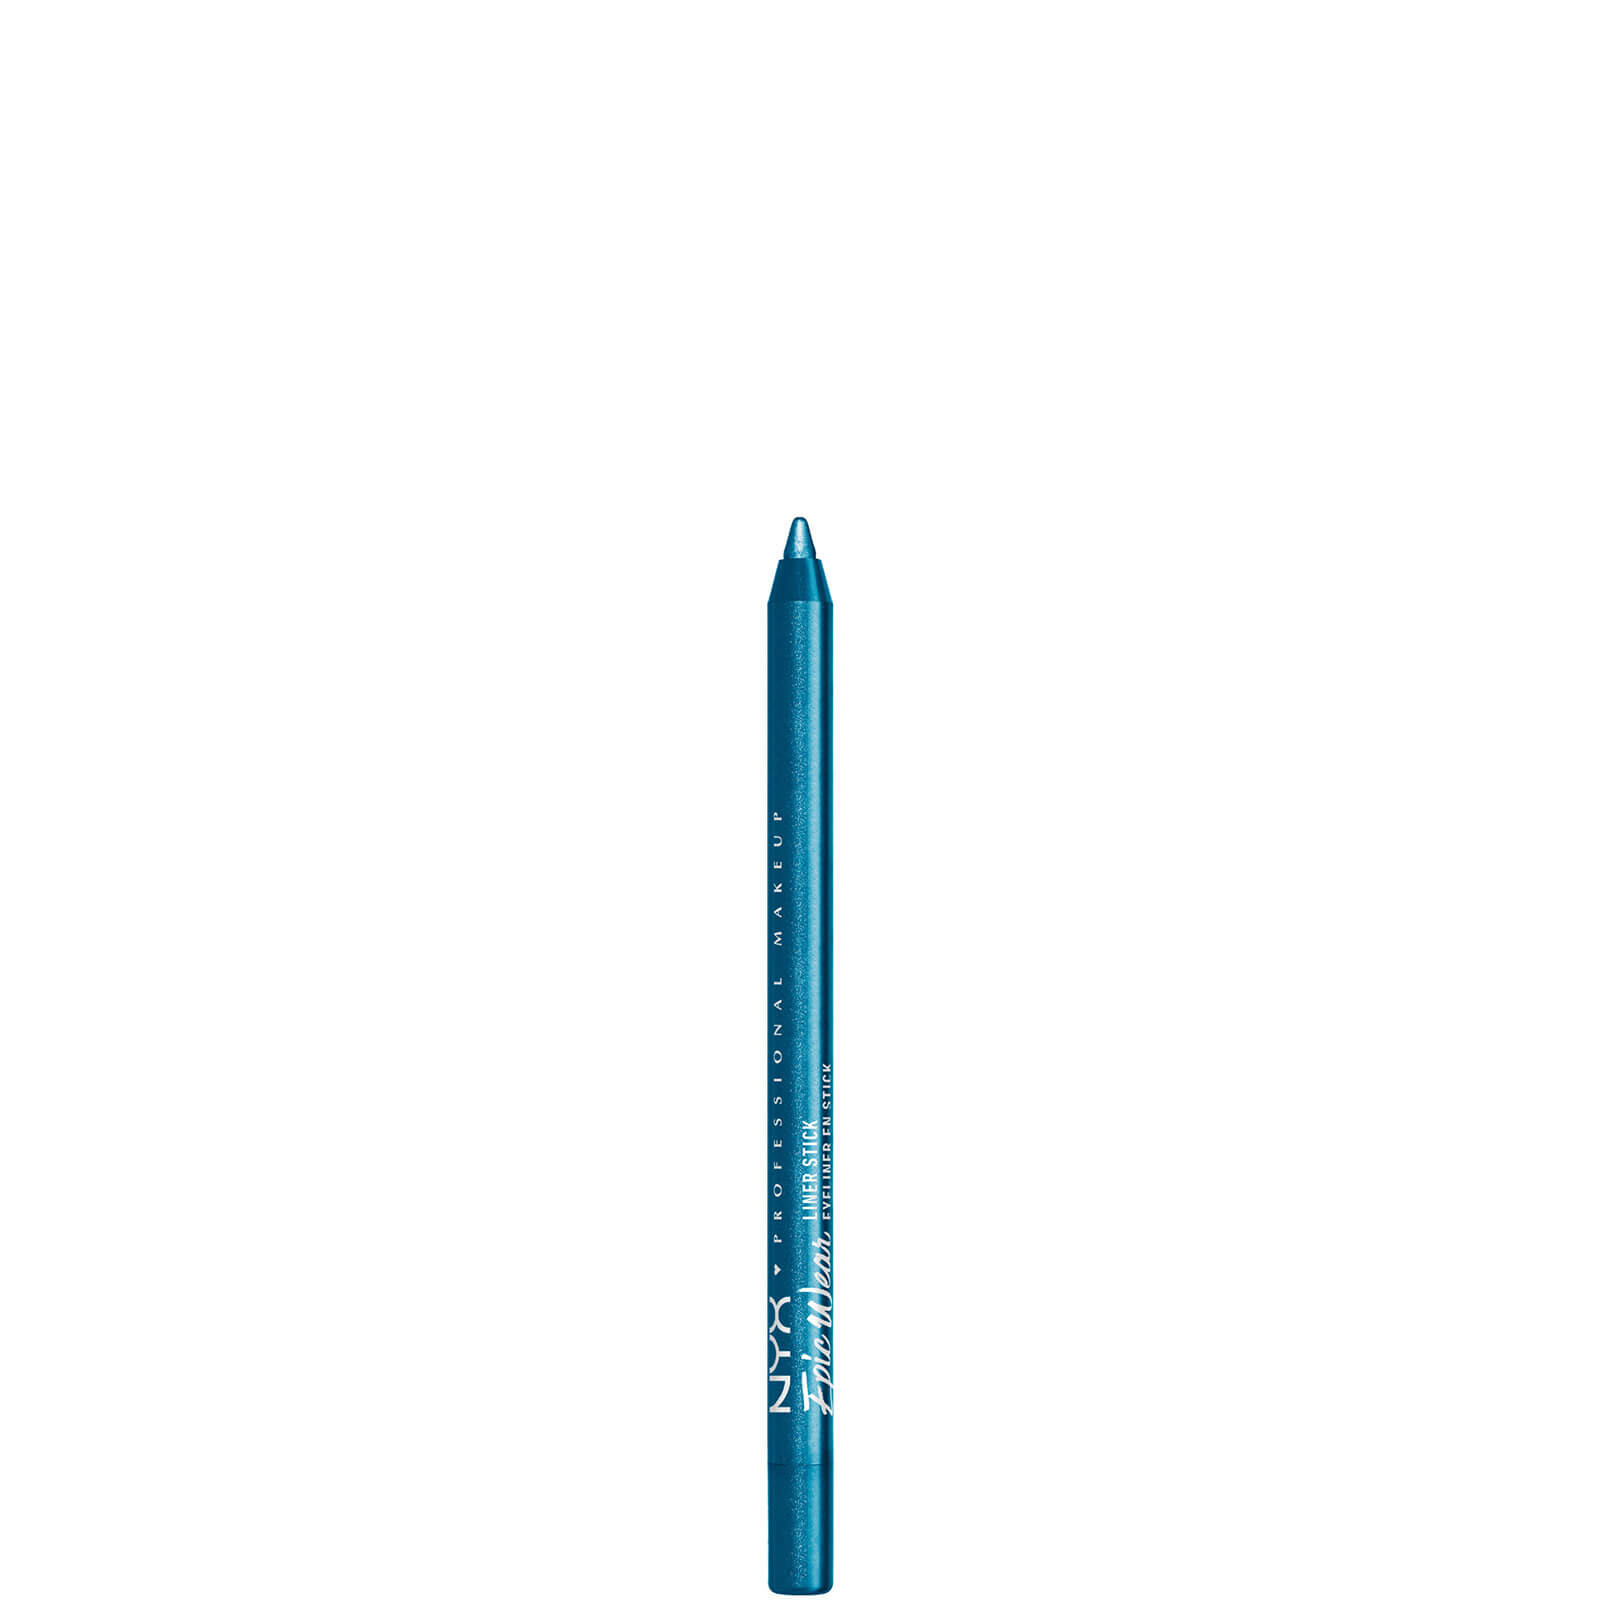 Image of NYX Professional Makeup Epic Wear Long Lasting Liner Stick 1.22g (Various Shades) - Turquoise Storm